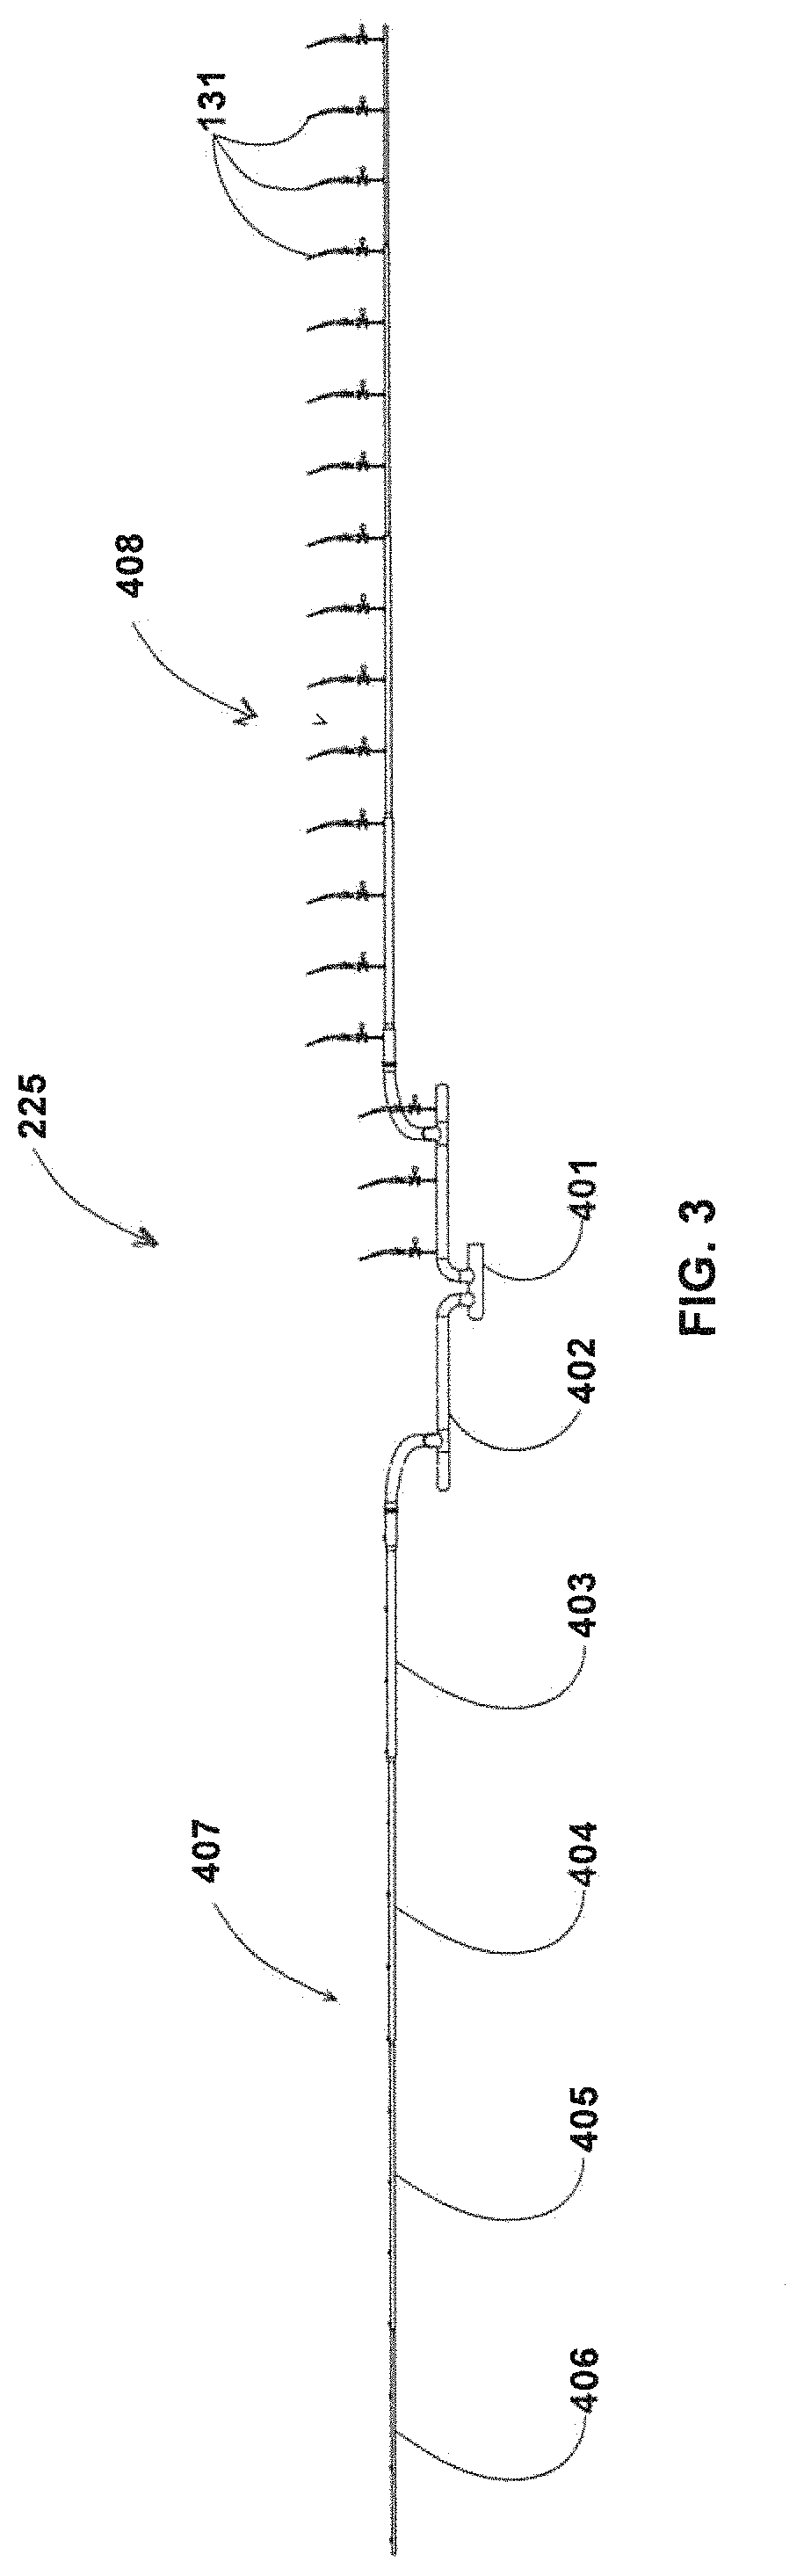 System, apparatus and method for applying anhydrous ammonia (NH3) to the soil